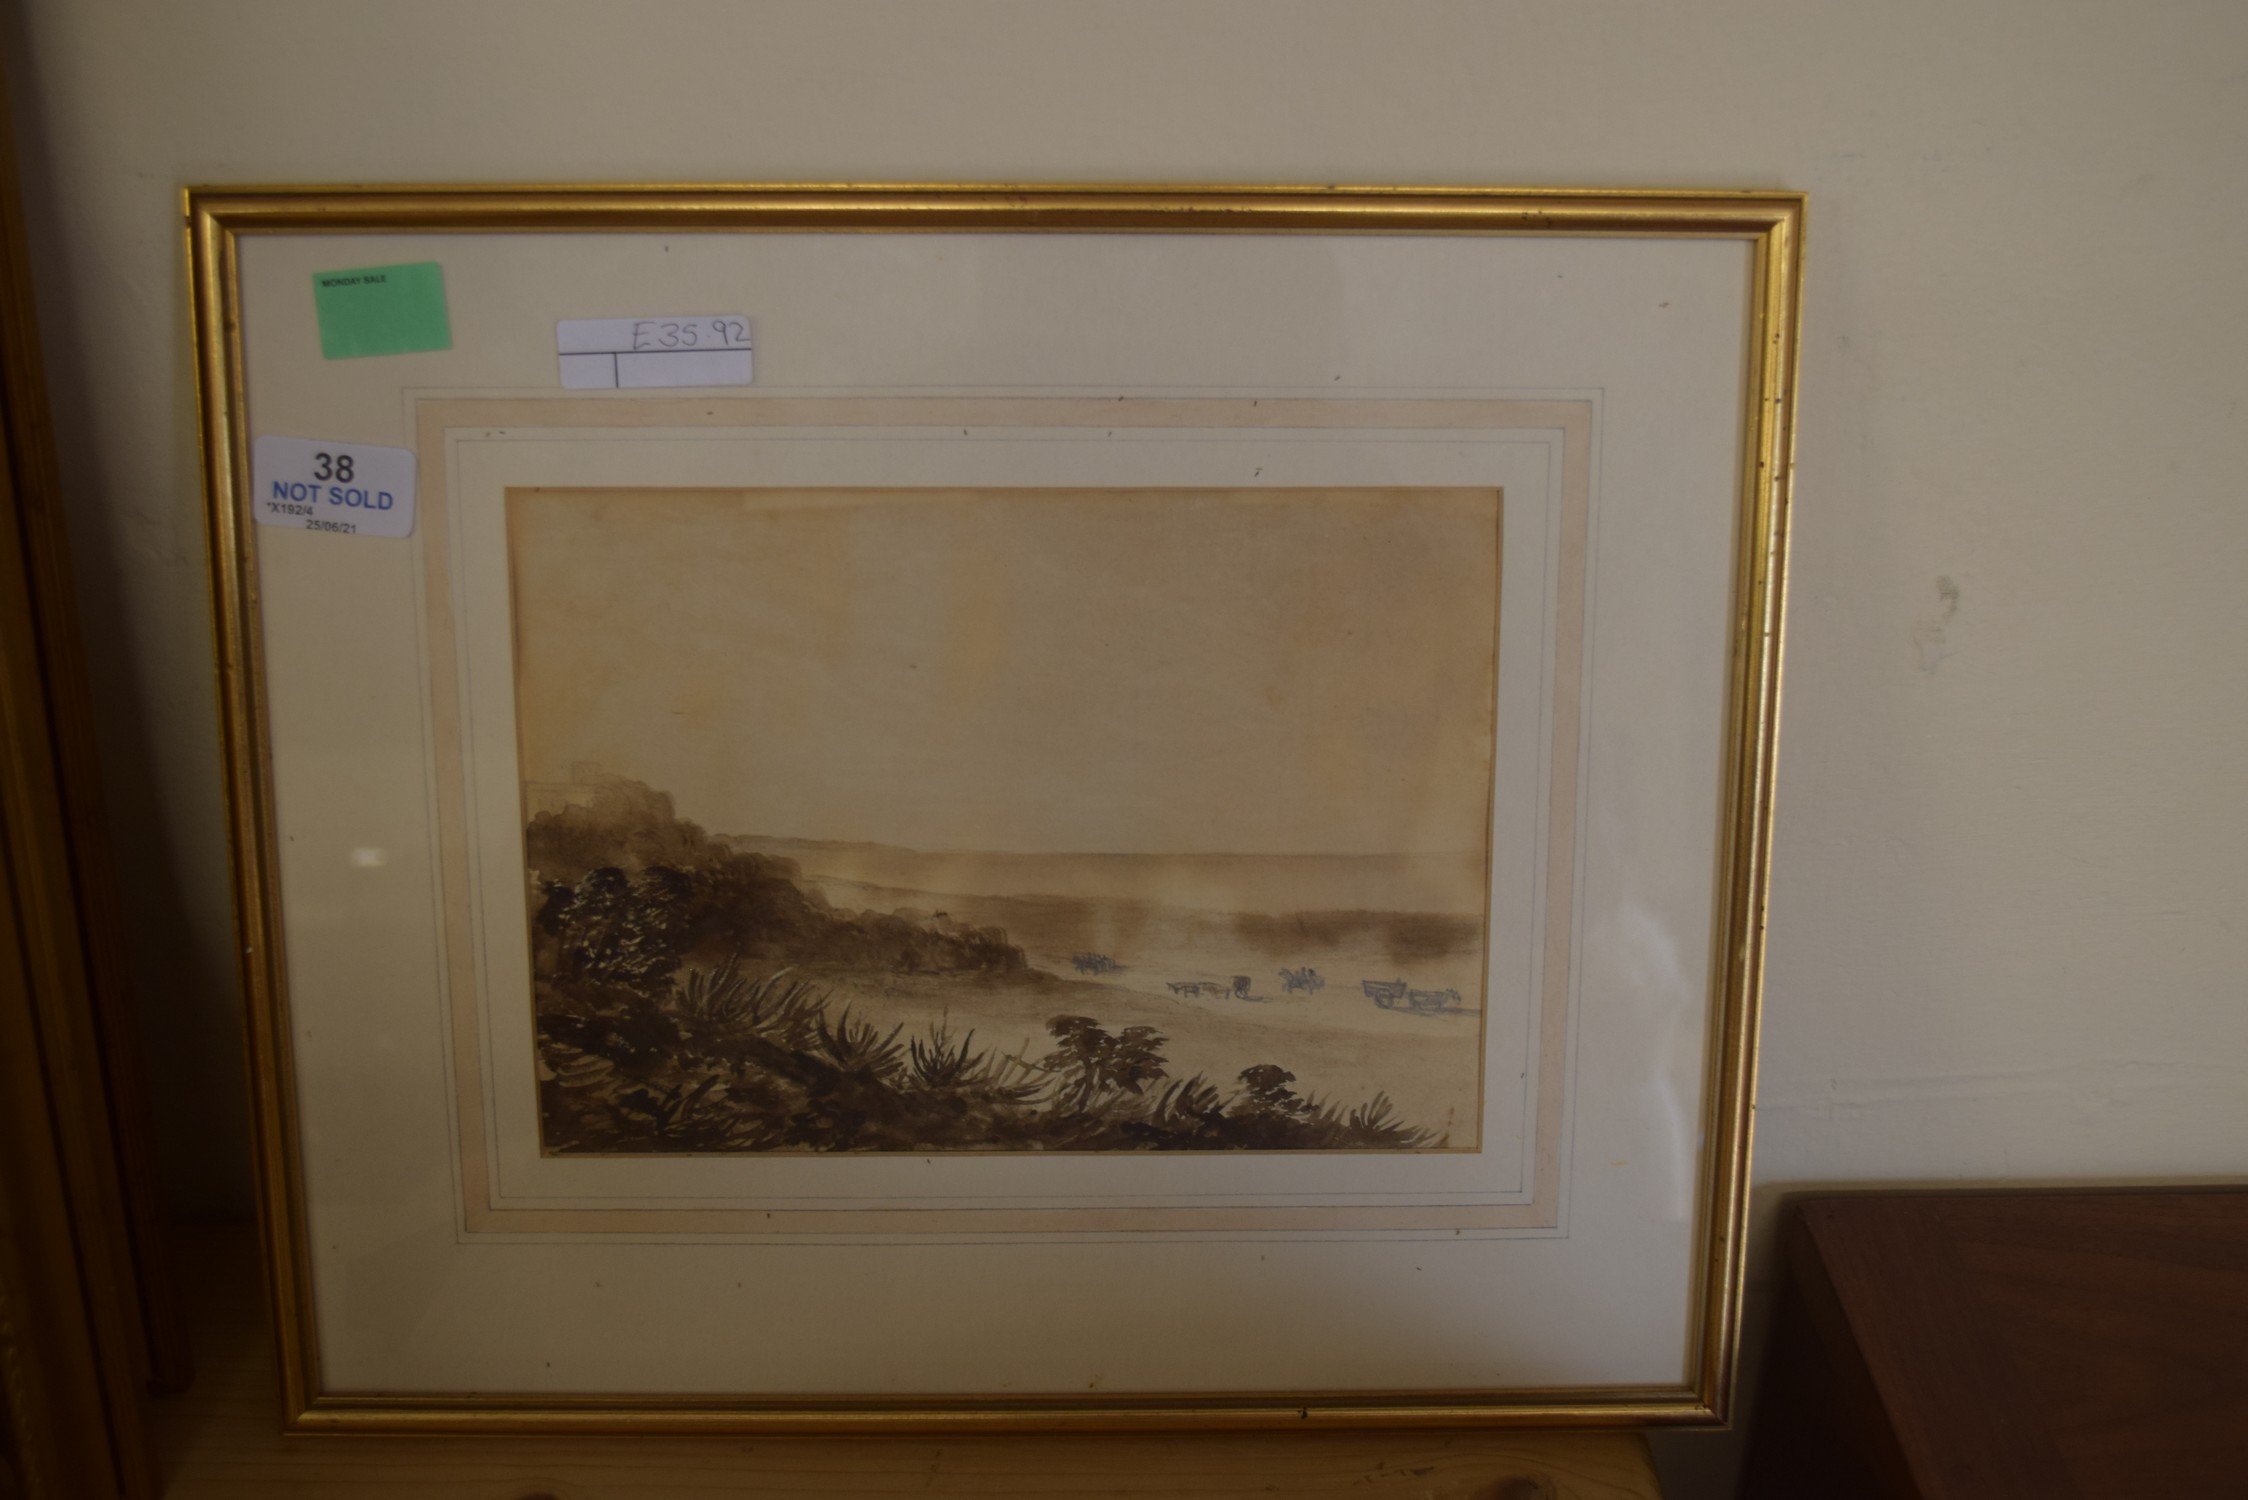 FRAMED WATERCOLOUR OF A LANDSCAPE AND A FURTHER LANDSCAPE, EACH APPROX 16 X 24CM - Image 2 of 2